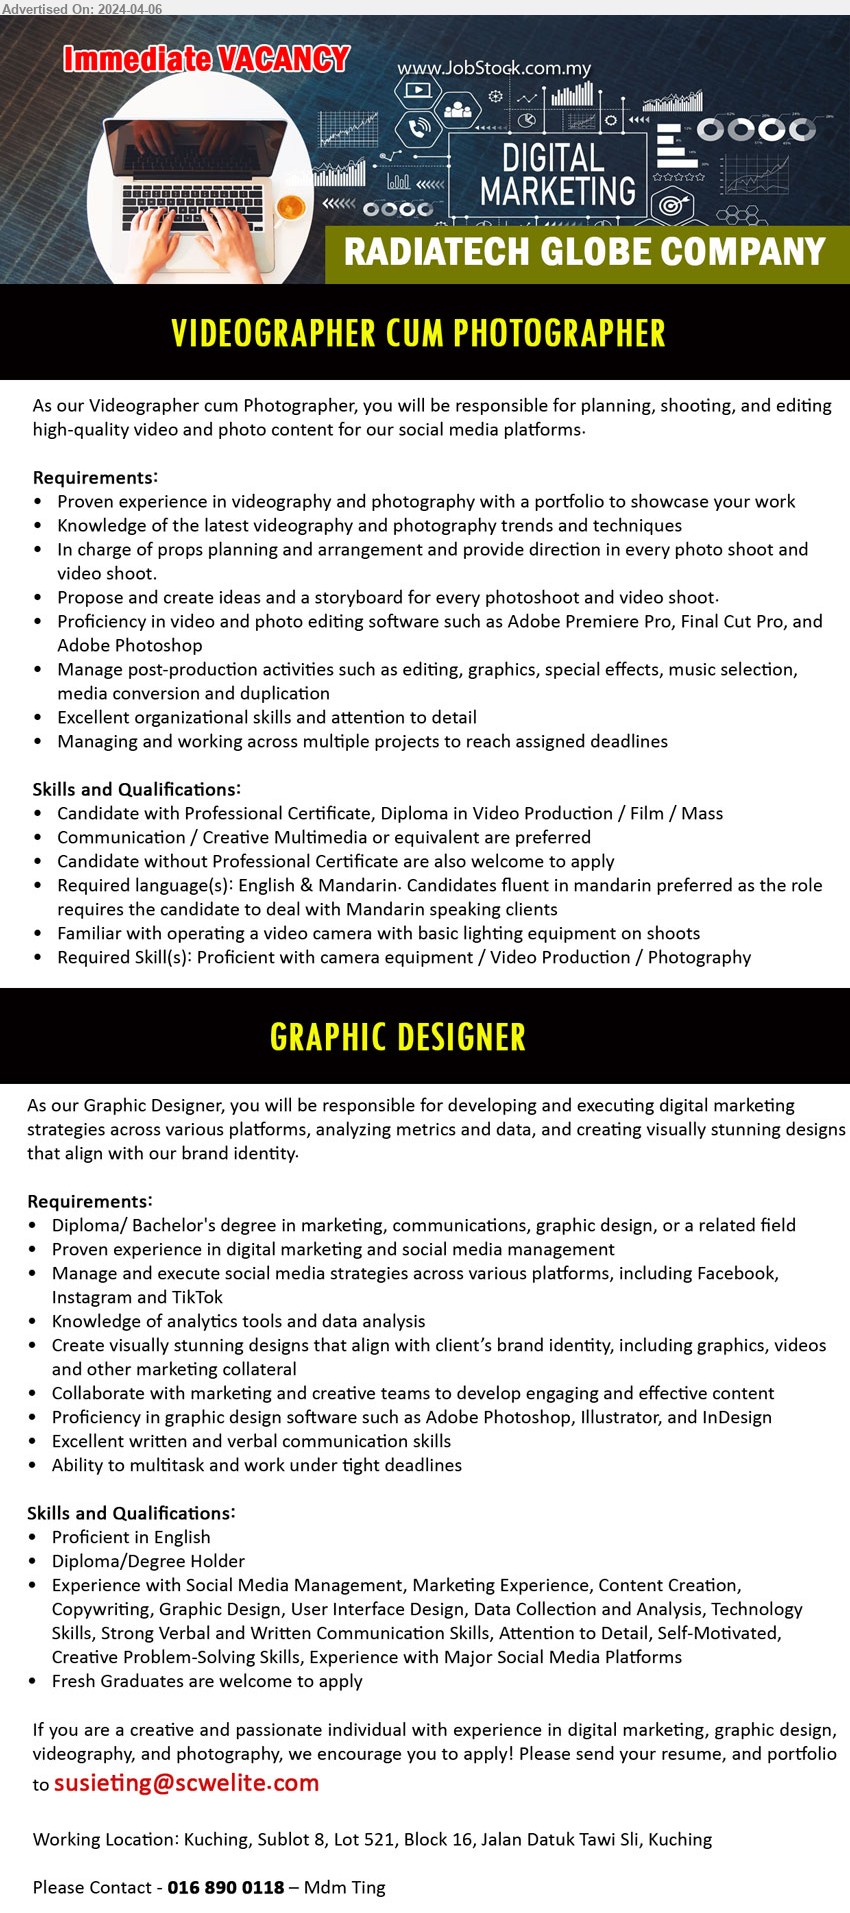 RADIATECH GLOBE COMPANY - 1. VIDEOGRAPHER CUM PHOTOGRAPHER (Kuching), Professional Certificate, Diploma in Video Production / Film / Mass , Communication / Creative Multimedia or equivalent are preferred,...
2. GRAPHIC DESIGNER (Kuching), Diploma/ Bachelor's degree in marketing, communications, graphic design,,...
call 016-8900118 or email resume.